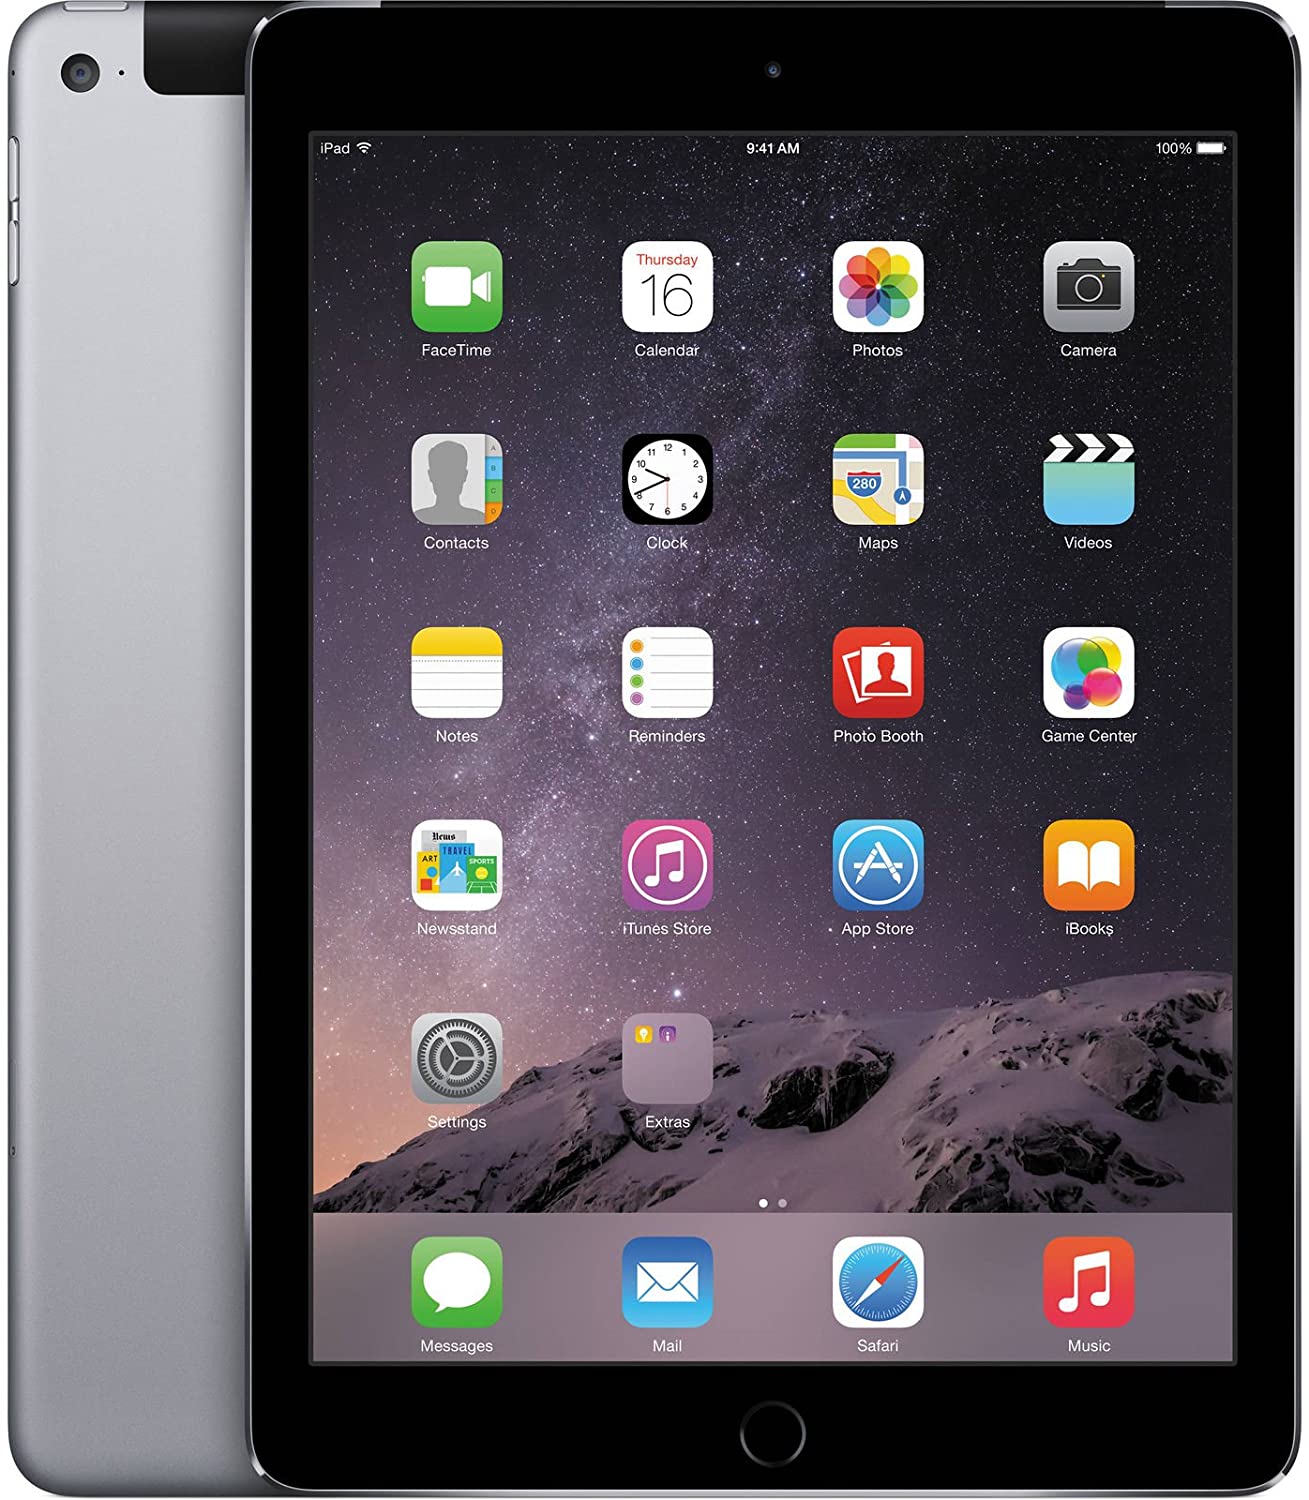 Apple iPad Air 2nd Generation, 128GB, WIFI + Unlocked All Carriers - Space Gray (Certified Refurbished)